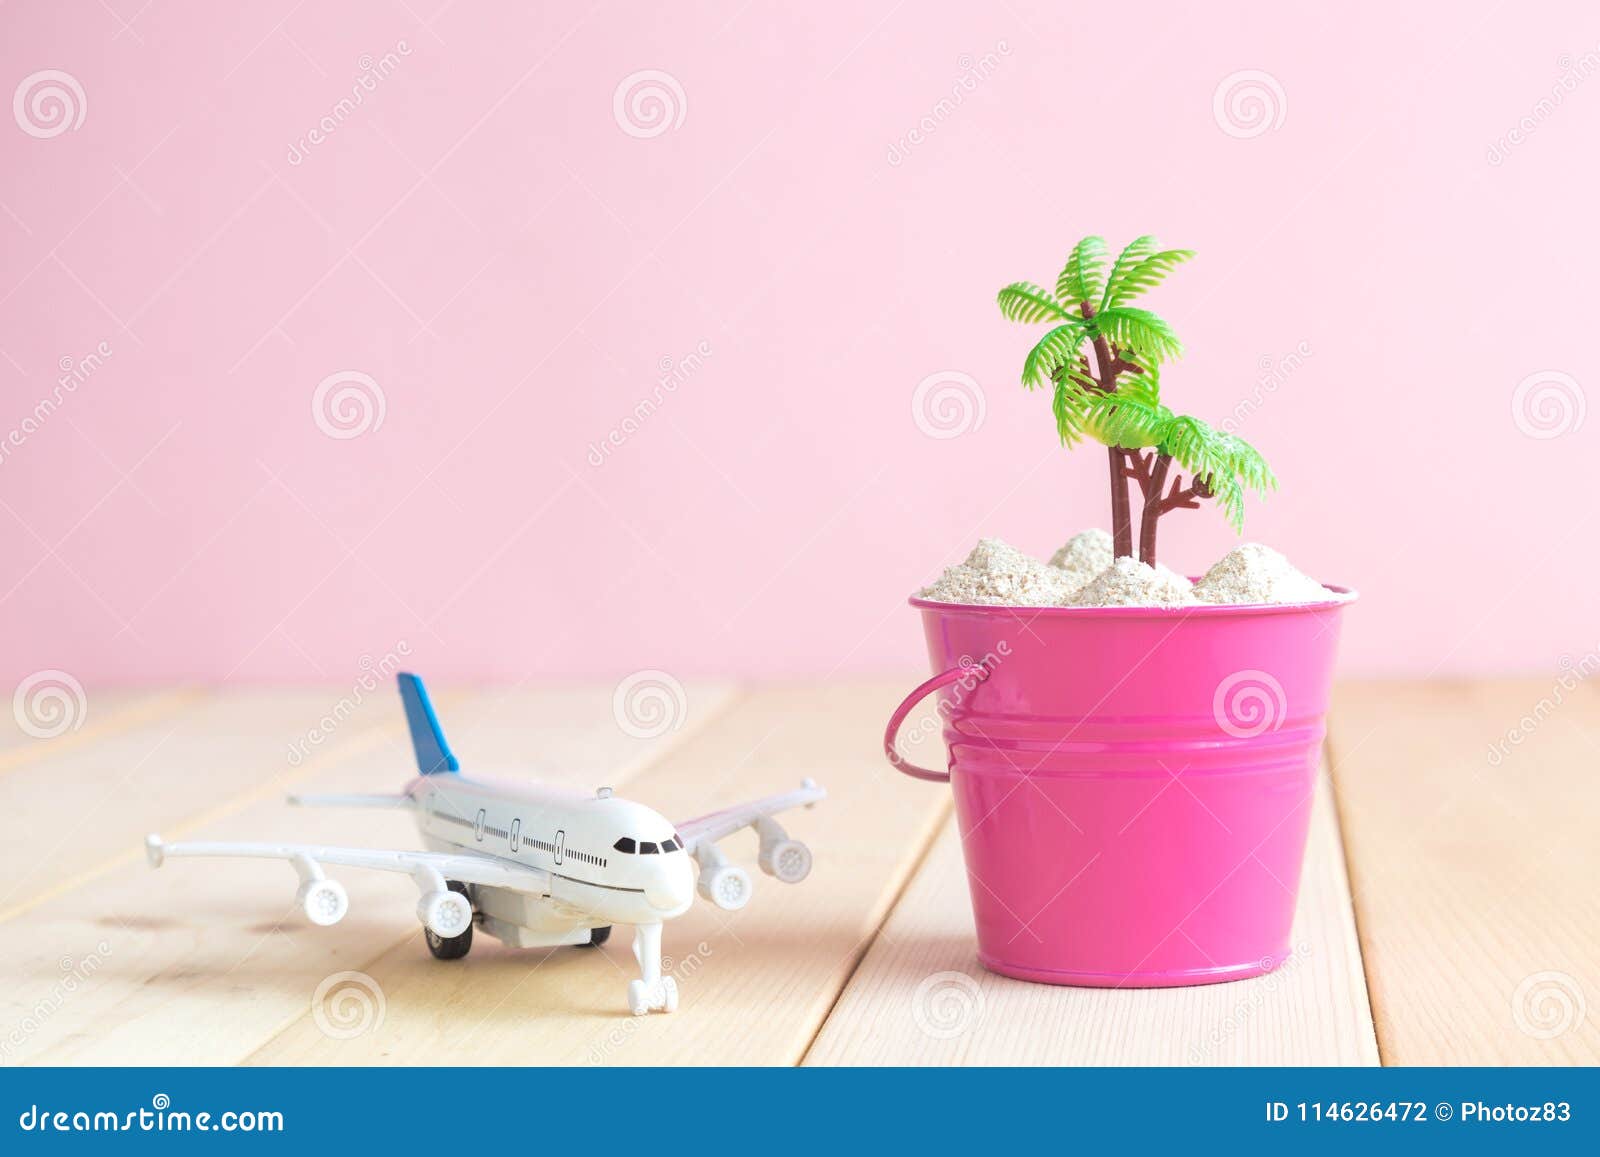 Small Can With Plastic Palm Tree And Aircraft Toy On Desk